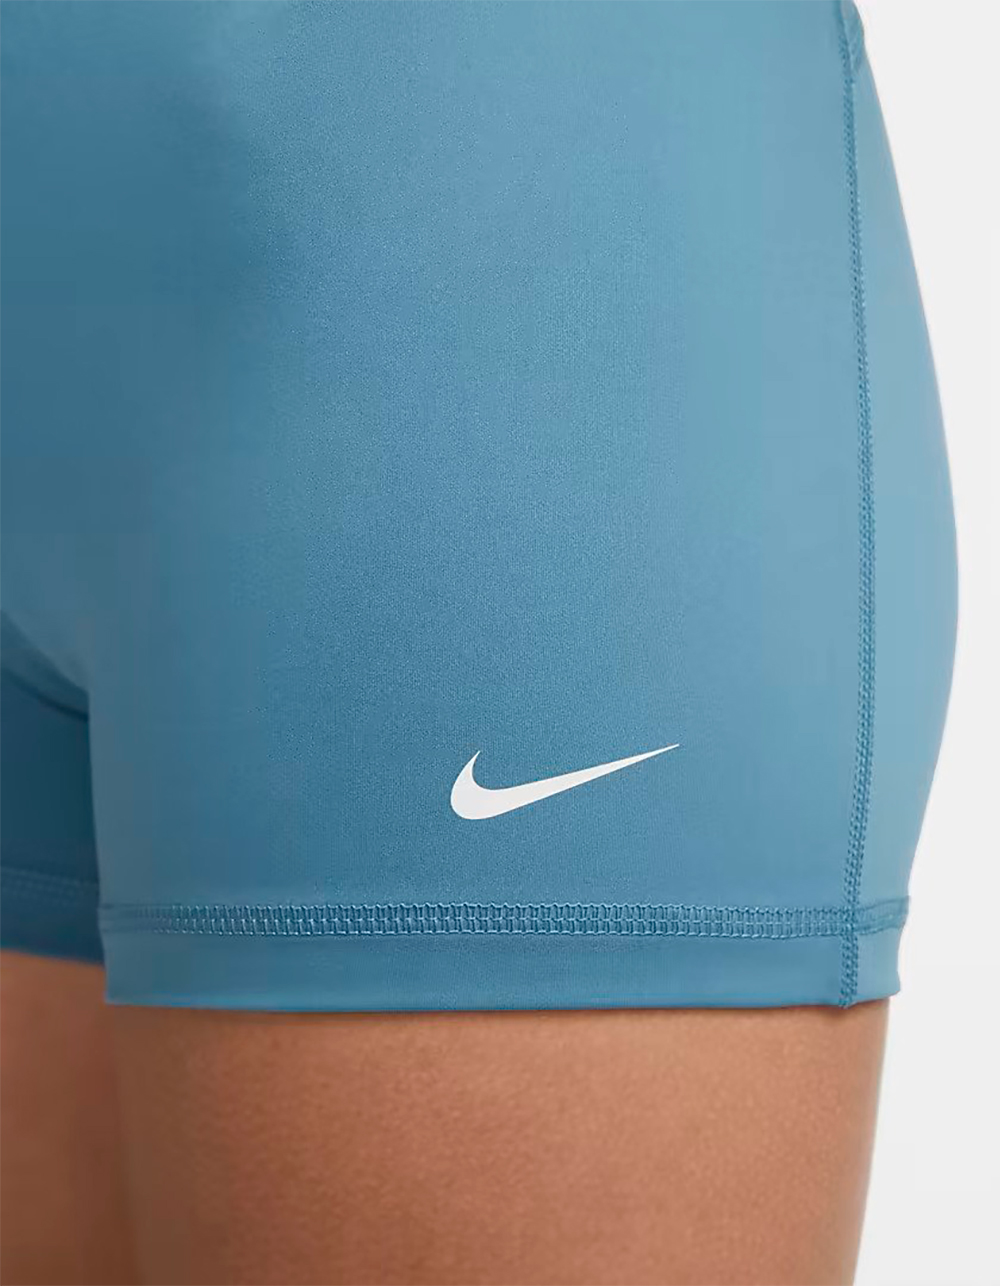 NIKE Pro Womens Compression Shorts - TEAL BLUE | Tillys